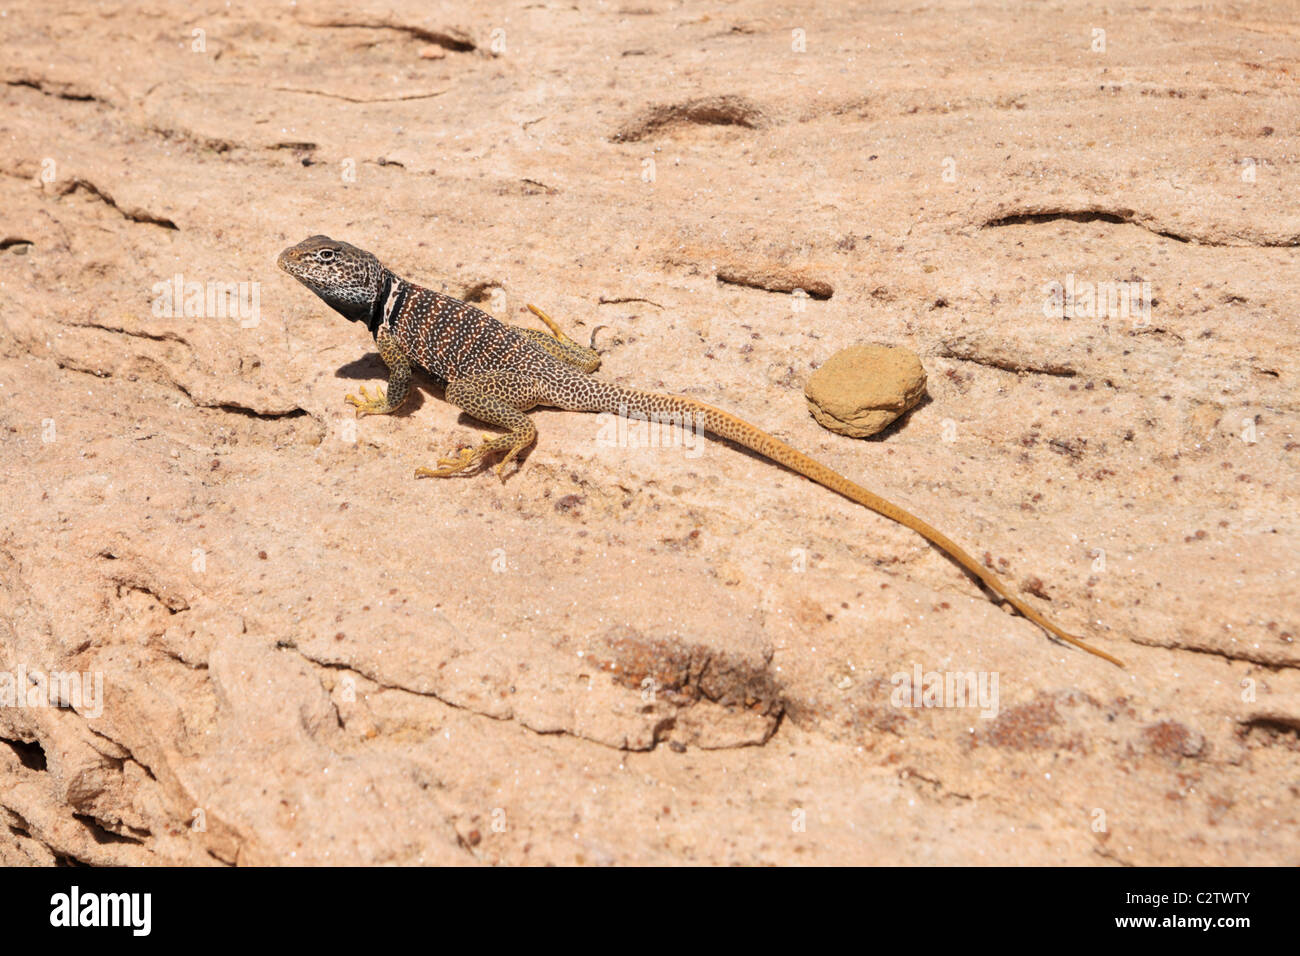 great basin collared lizard or Crotaphytus bicinctores on a rock in the Grand Canyon of Arizona Stock Photo